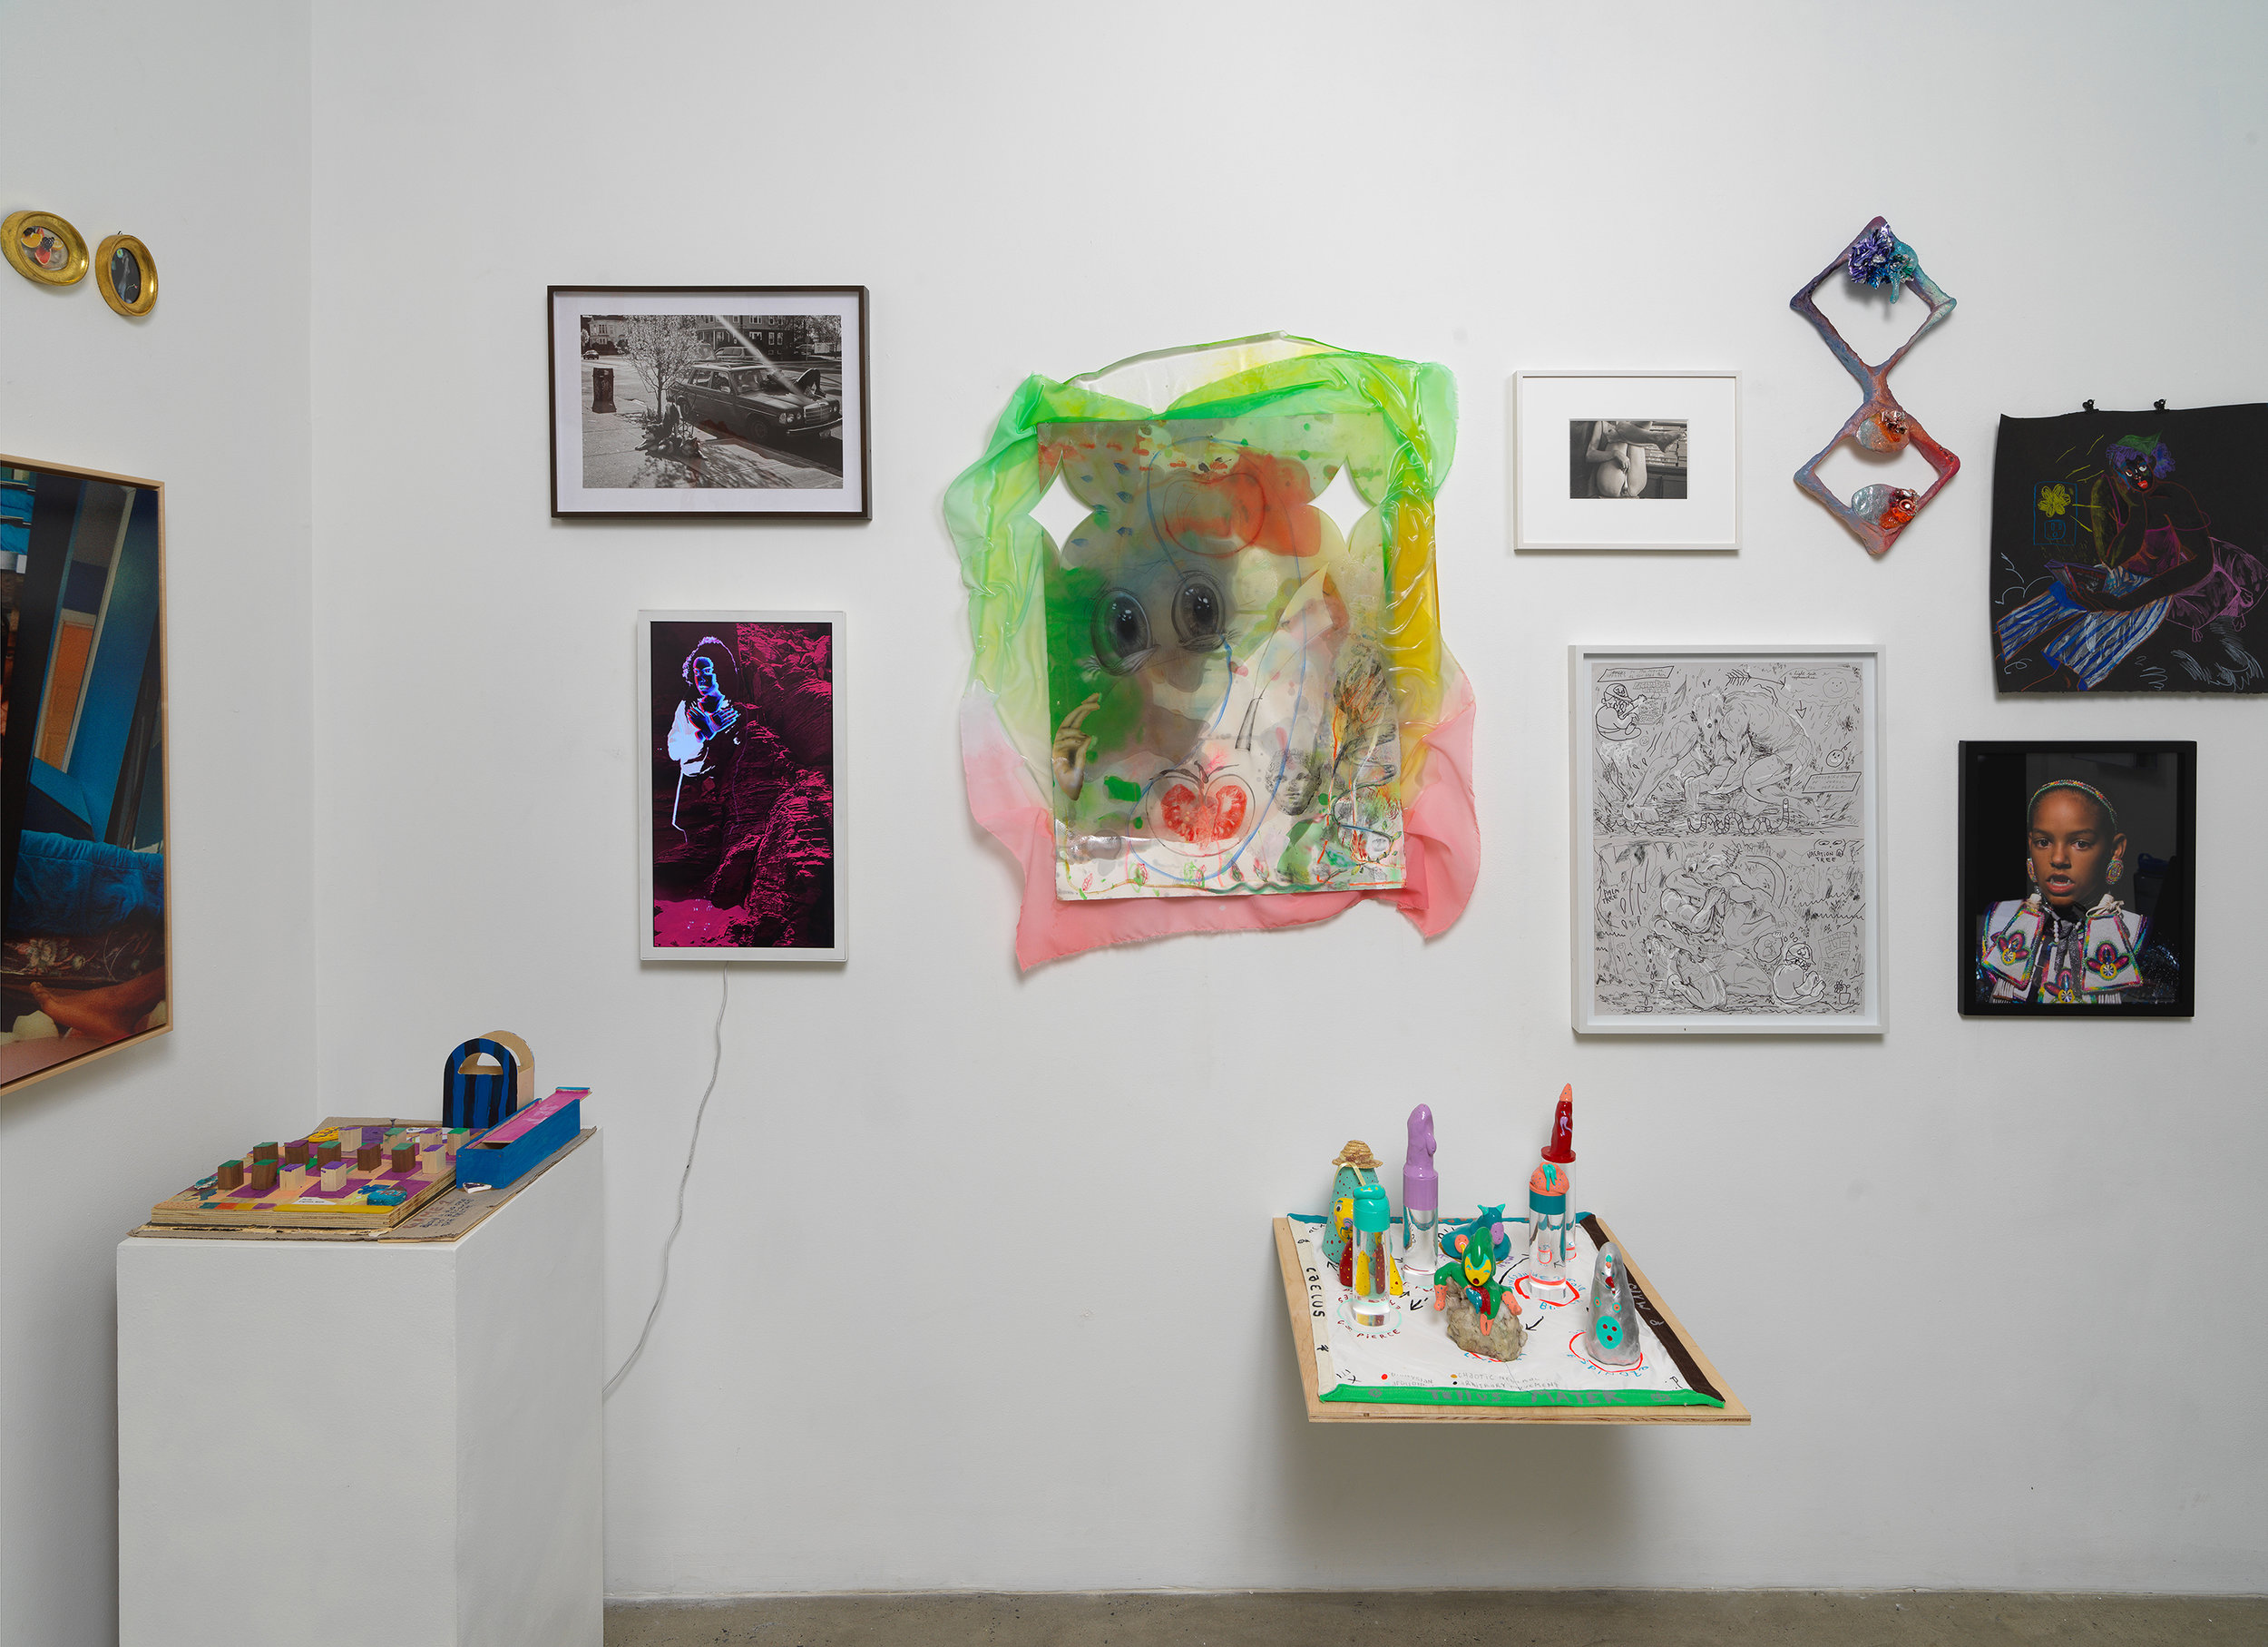 Installation view of 'Can You Dream It' featuring salon-style hanging of multimedia works by various artists, pedestal and shelf-based sculpture